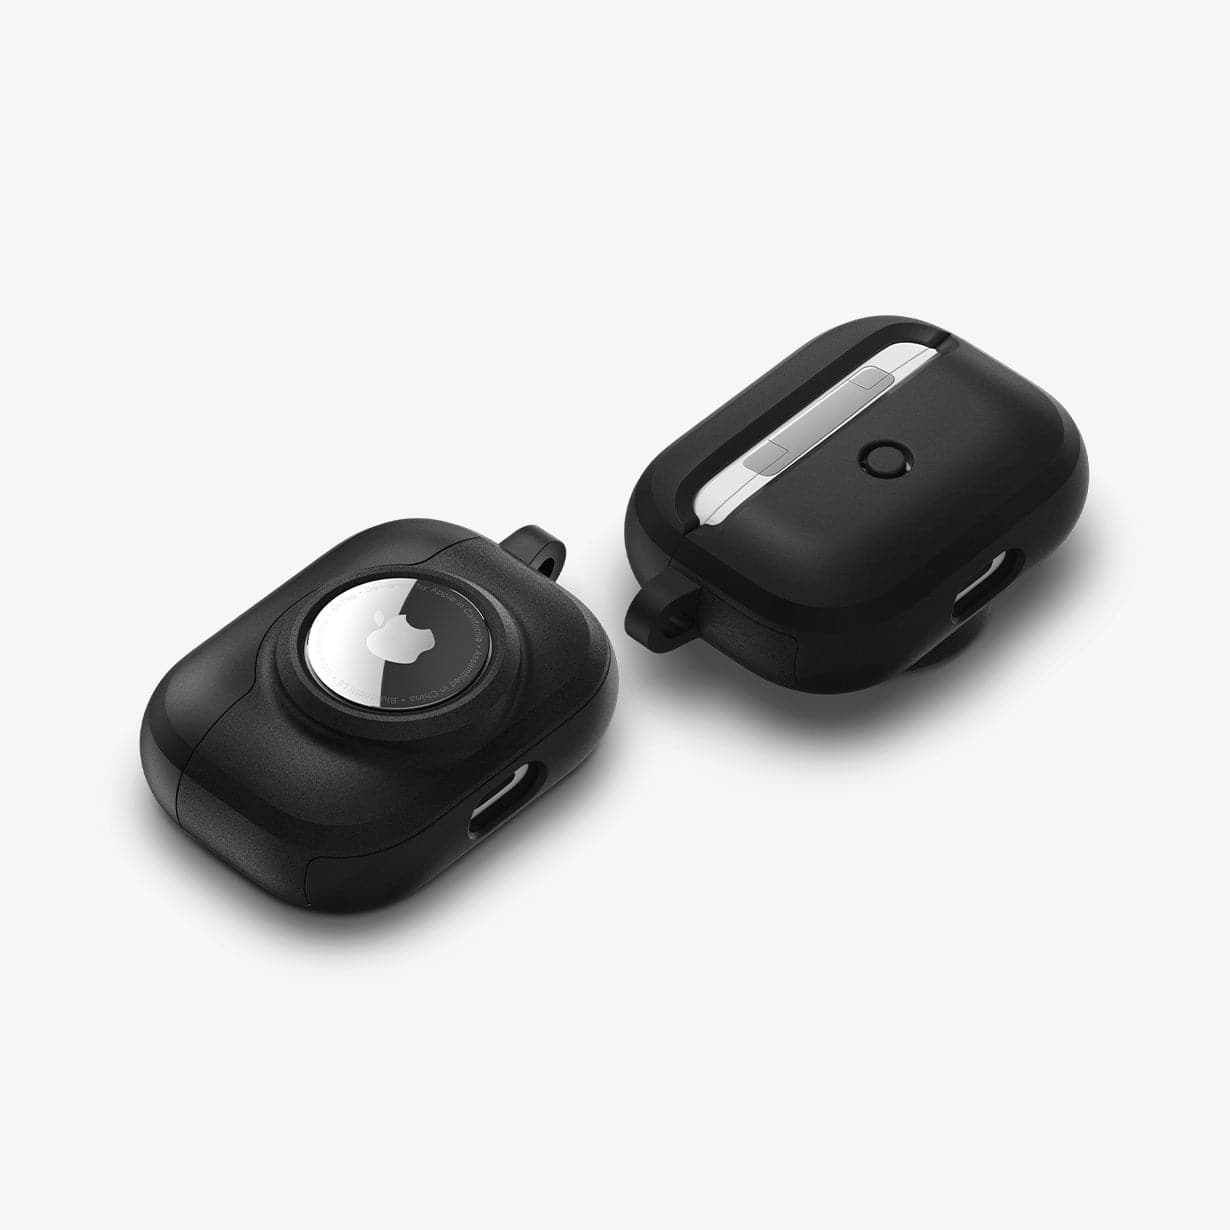 ACS03167 - Apple AirPods Pro Case Tag Armor Duo in black showing the front, back and bottom